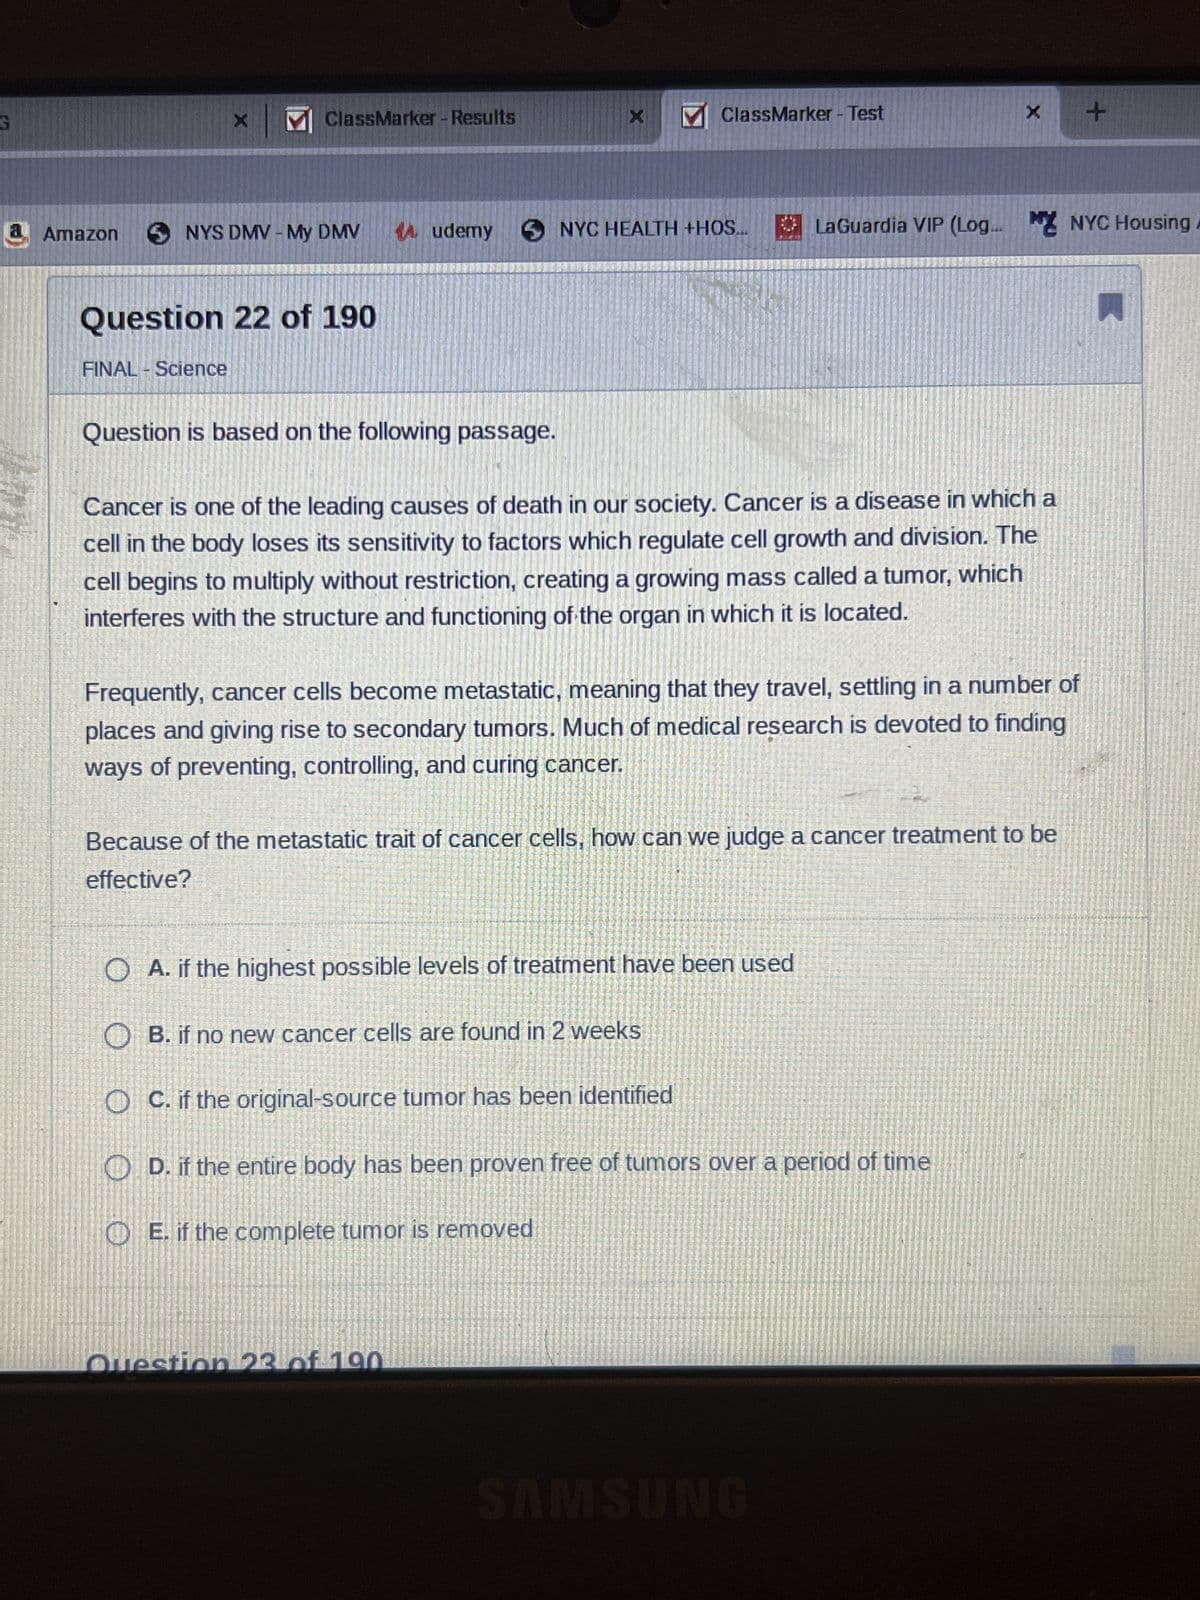 G
a
X
MClassMarker - Results
Amazon SNYS DMV - My DMV
Question 22 of 190
FINAL - Science
Audemy
Question is based on the following passage.
X
ClassMarker - Test
NYC HEALTH +HOS...
Question 23 of 190
Cancer is one of the leading causes of death in our society. Cancer is a disease in which a
cell in the body loses its sensitivity to factors which regulate cell growth and division. The
cell begins to multiply without restriction, creating a growing mass called a tumor, which
interferes with the structure and functioning of the organ in which it is located.
x +
LaGuardia VIP (Log... NYC Housing A
requently, cancer cells become metastatic, meaning that they travel, settling in a number of
places and giving rise to secondary tumors. Much of medical research is devoted to finding
ways of preventing, controlling, and curing cancer.
Because of the metastatic trait of cancer cells, how can we judge a cancer treatment to be
effective?
OA. if the highest possible levels of treatment have been used
OB. if no new cancer cells are found in 2 weeks
OC. if the original-source tumor has been identified
D. if the entire body has been proven free of tumors over a period of time
E. if the complete tumor is removed
SAMSUNG